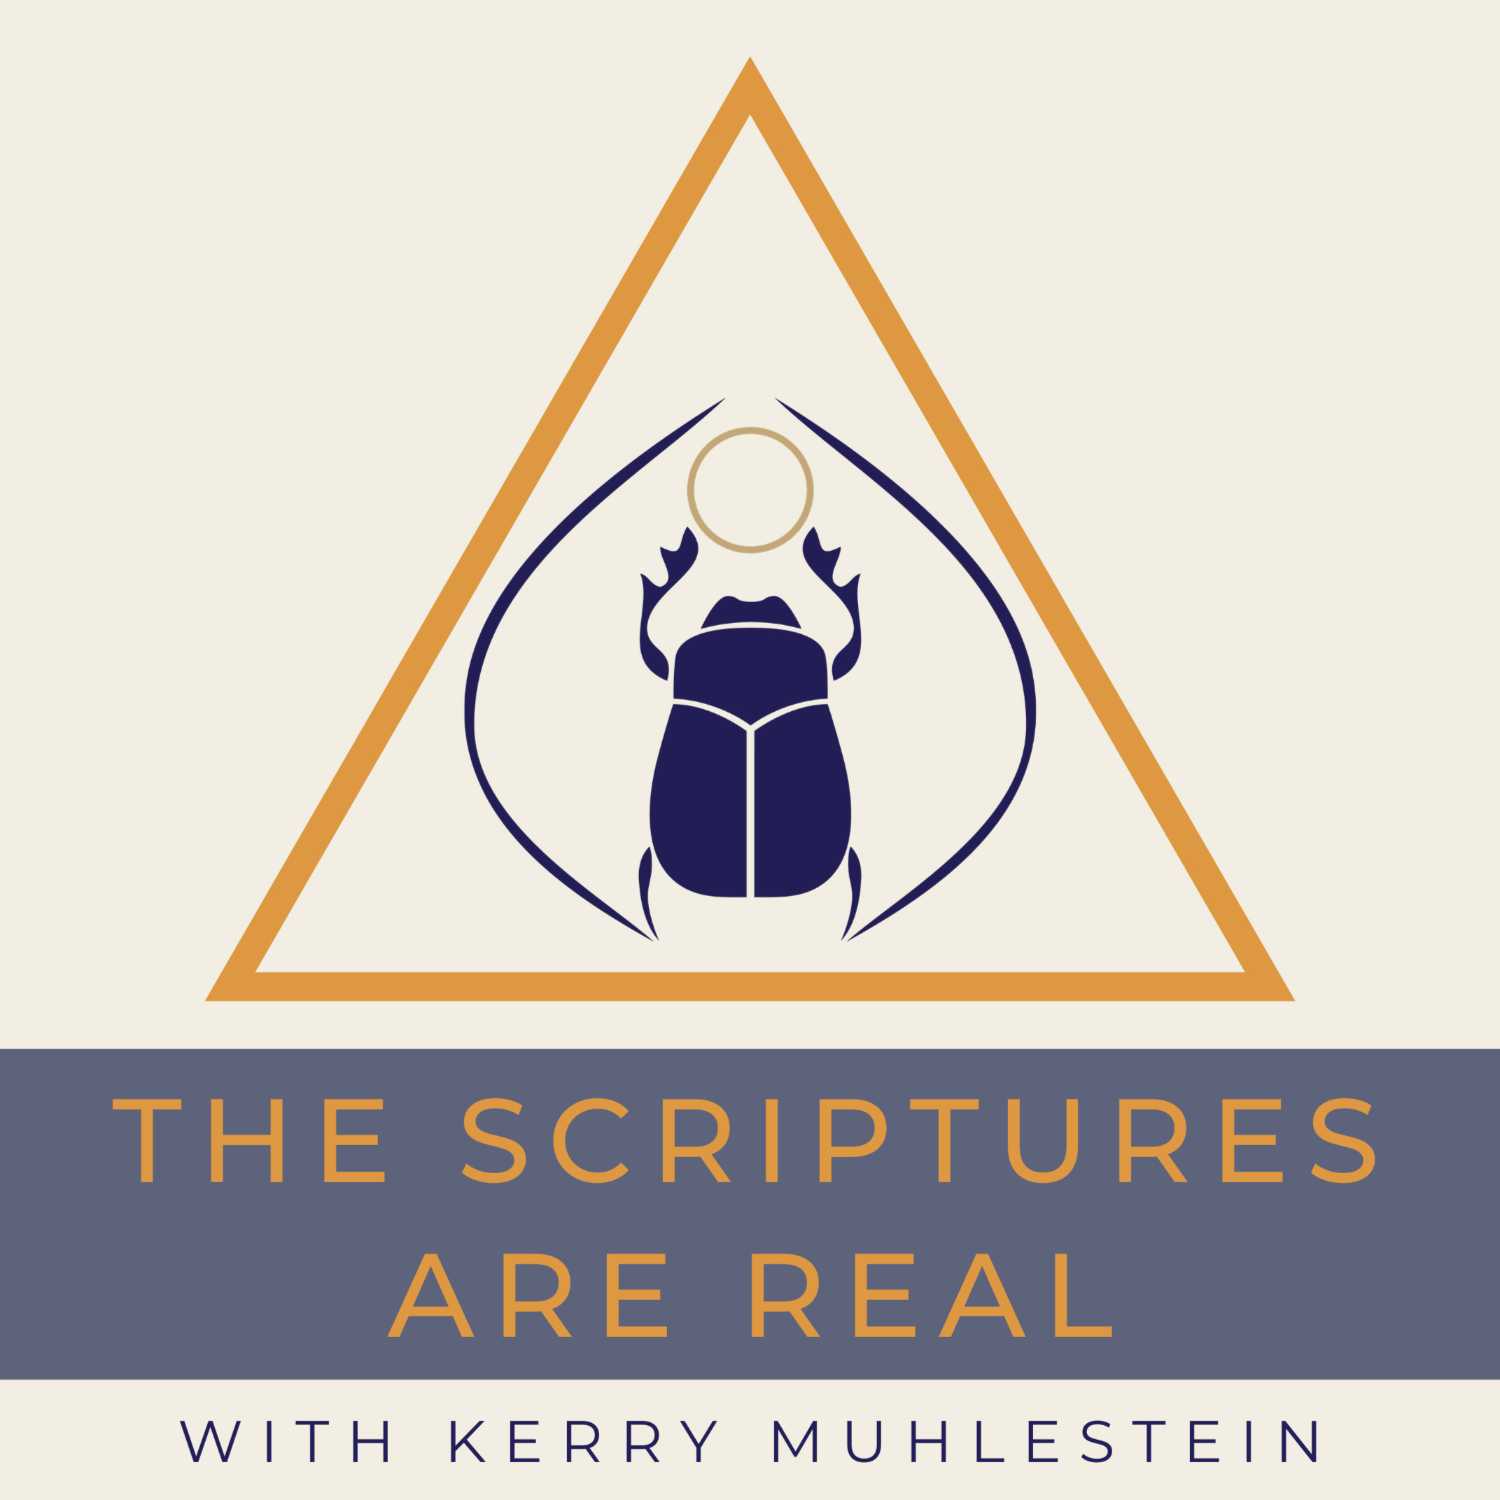 Kim Matheson on the Power of Prayer and the Lord's Prayer (week of Jan. 20, first to listen to)